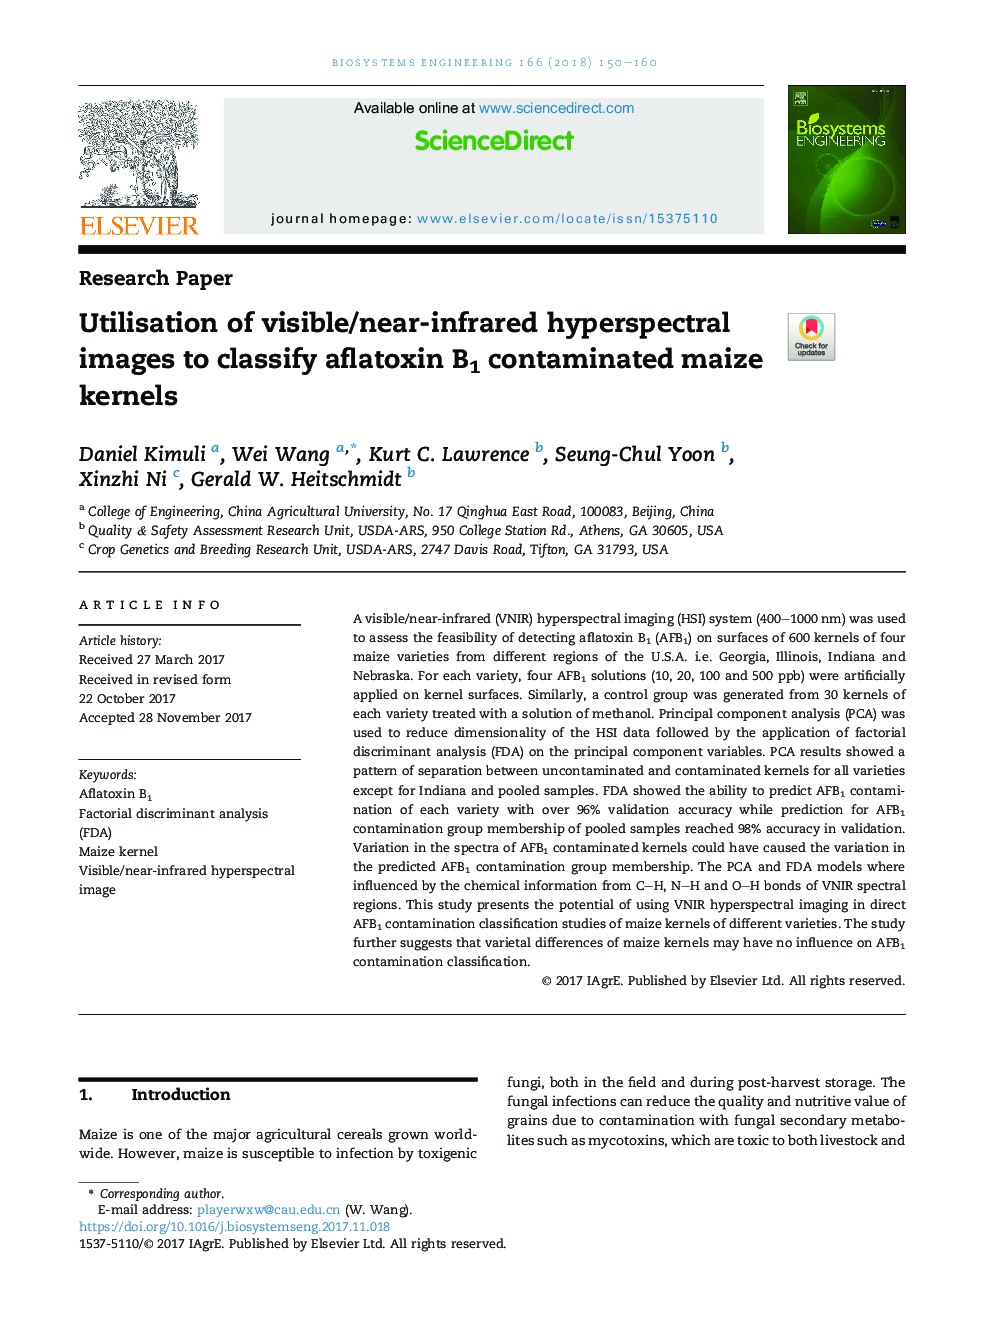 Utilisation of visible/near-infrared hyperspectral images to classify aflatoxin B1 contaminated maize kernels